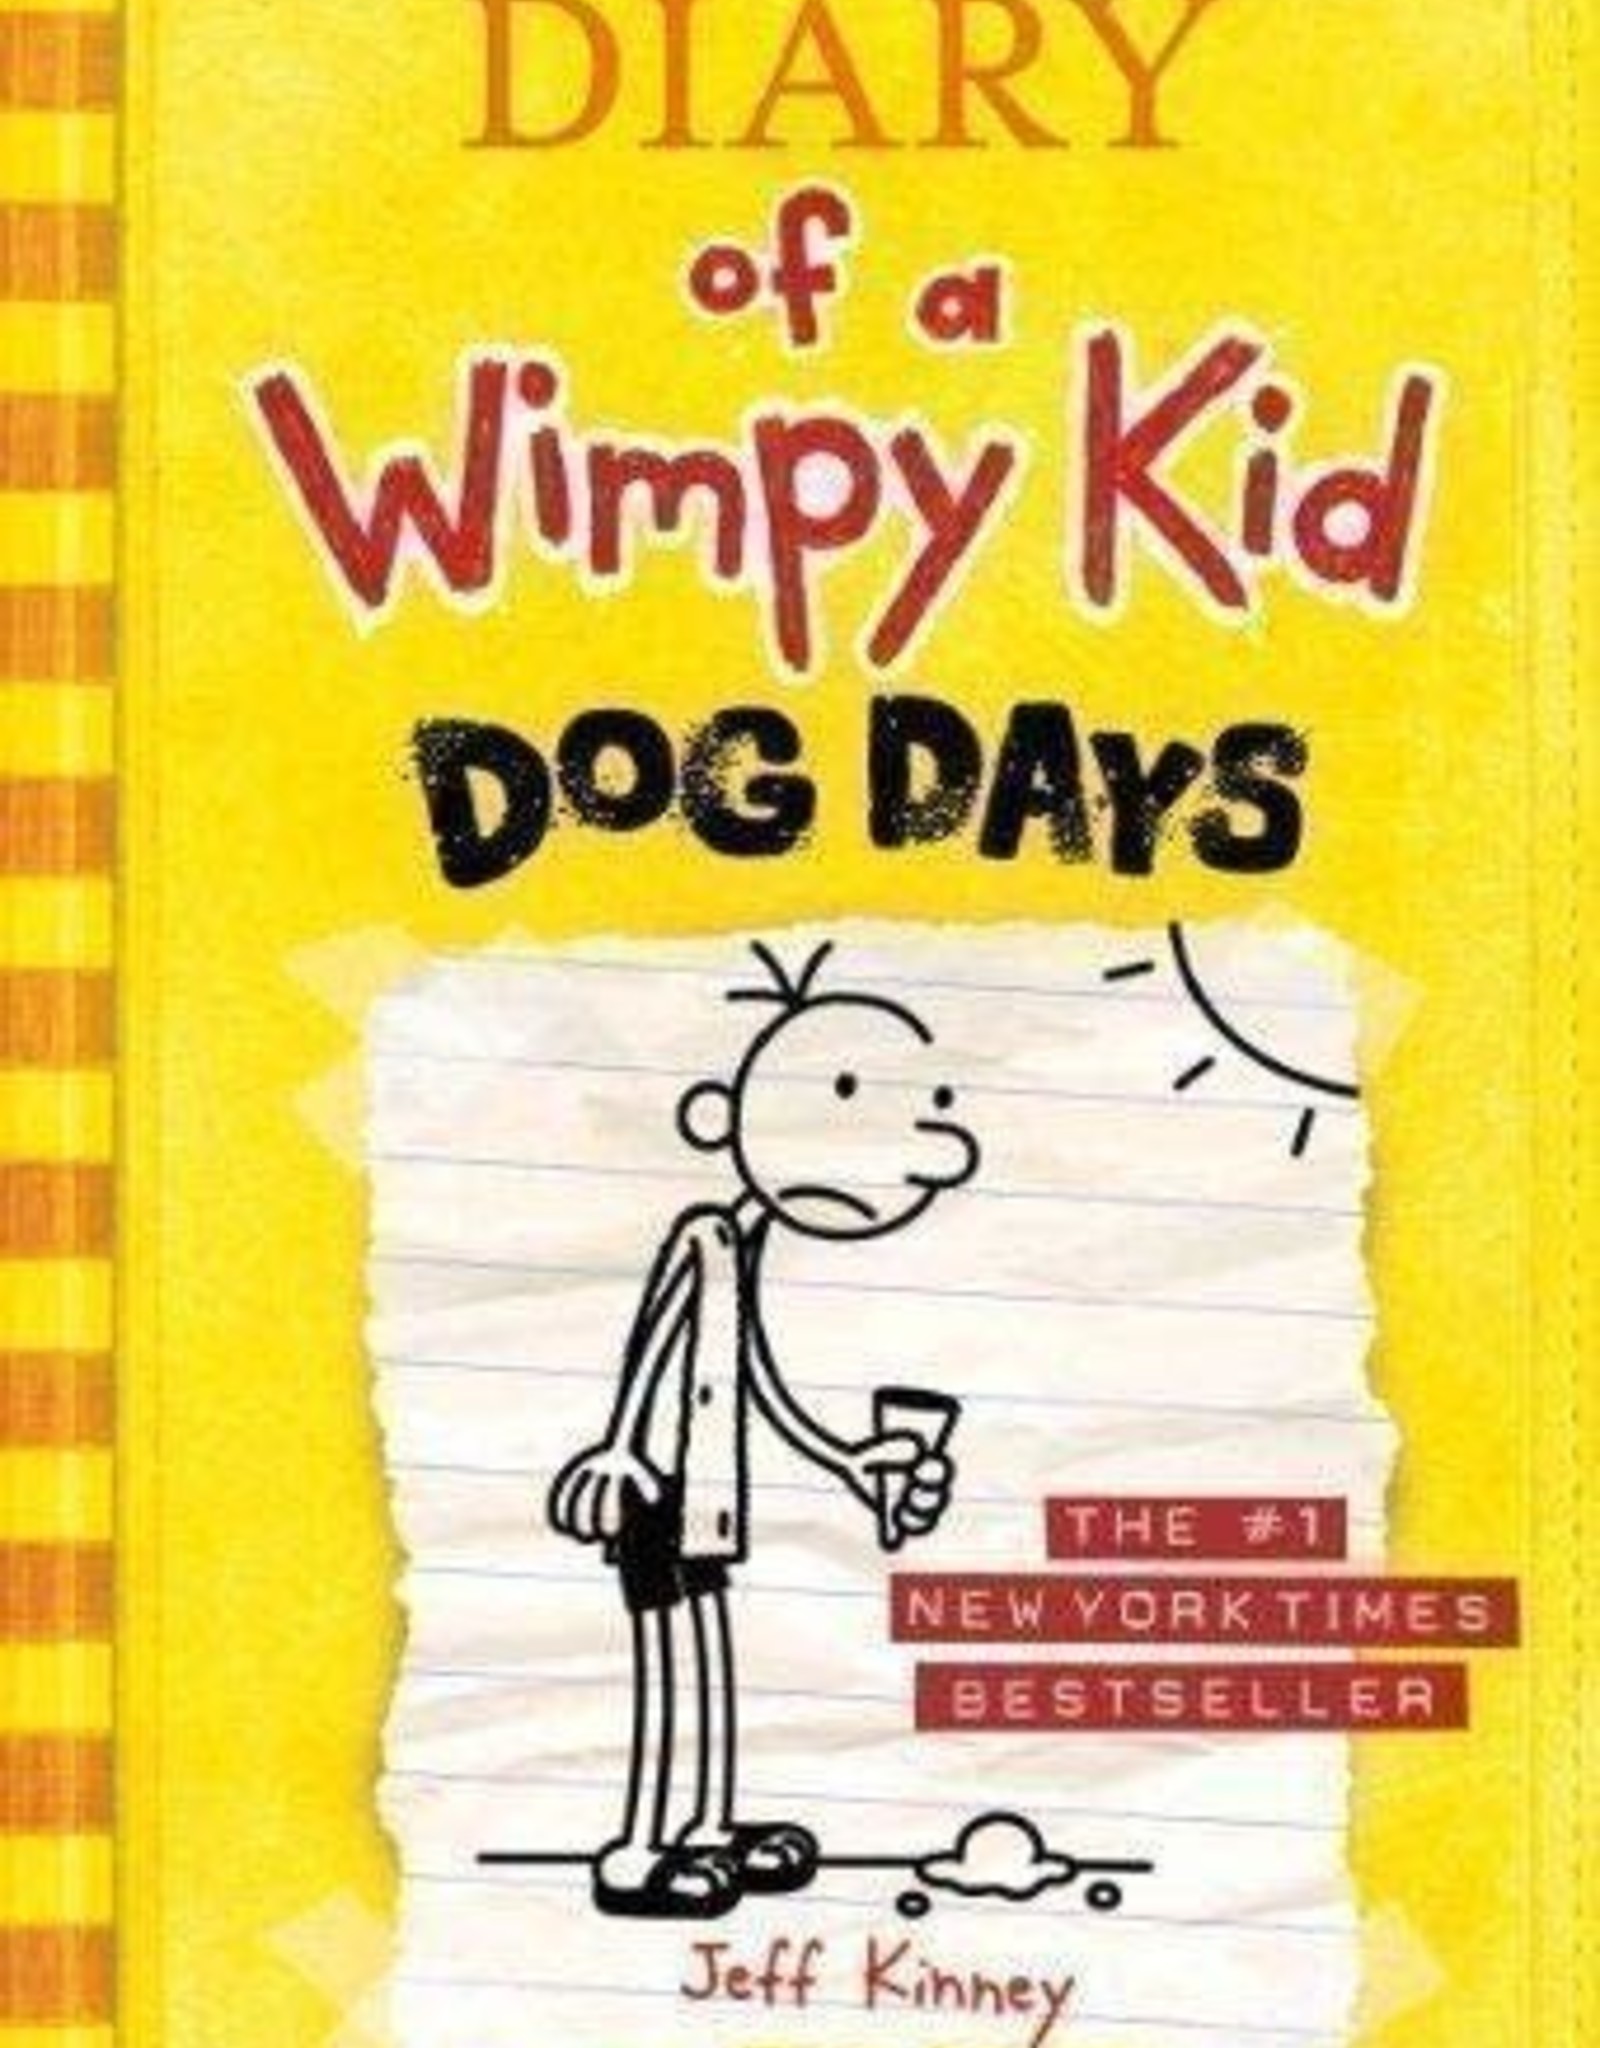 Diary Of A Wimpy Kid #4 Dog Days